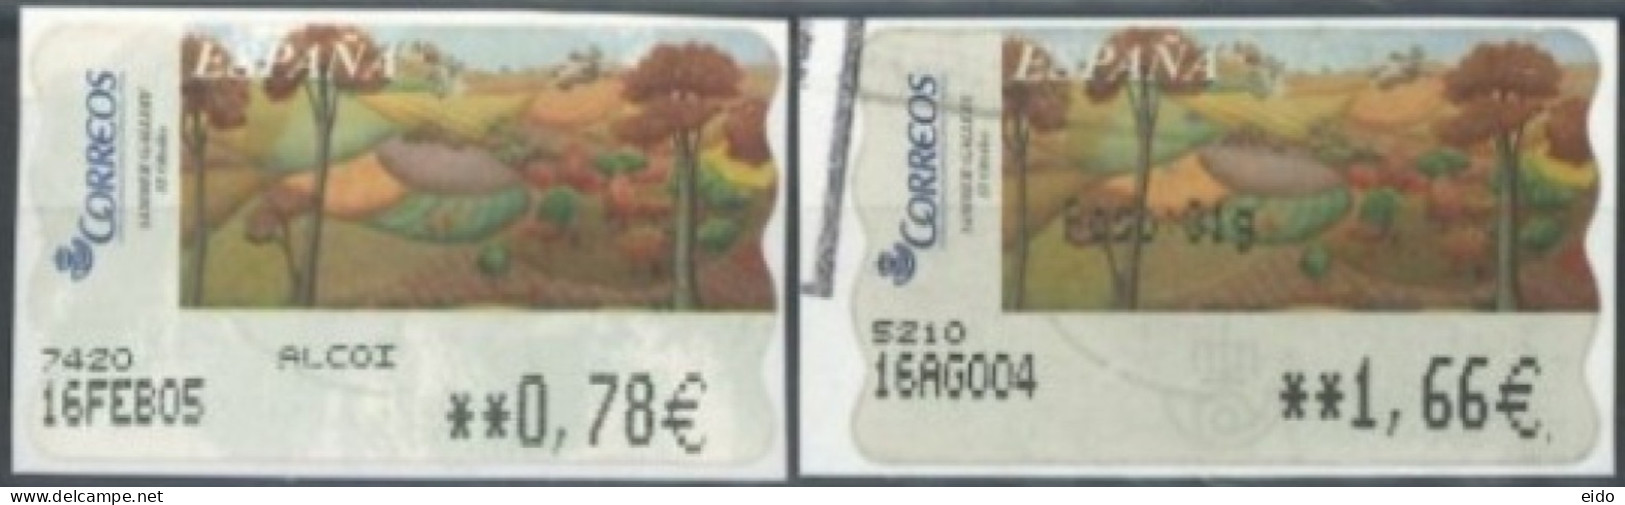 SPAIN - 2004/05 -  SAMER GALLERY, VERANO STAMPS LABELS SET OF 2 OF DIFFERENT VALUES, USED . - Gebraucht